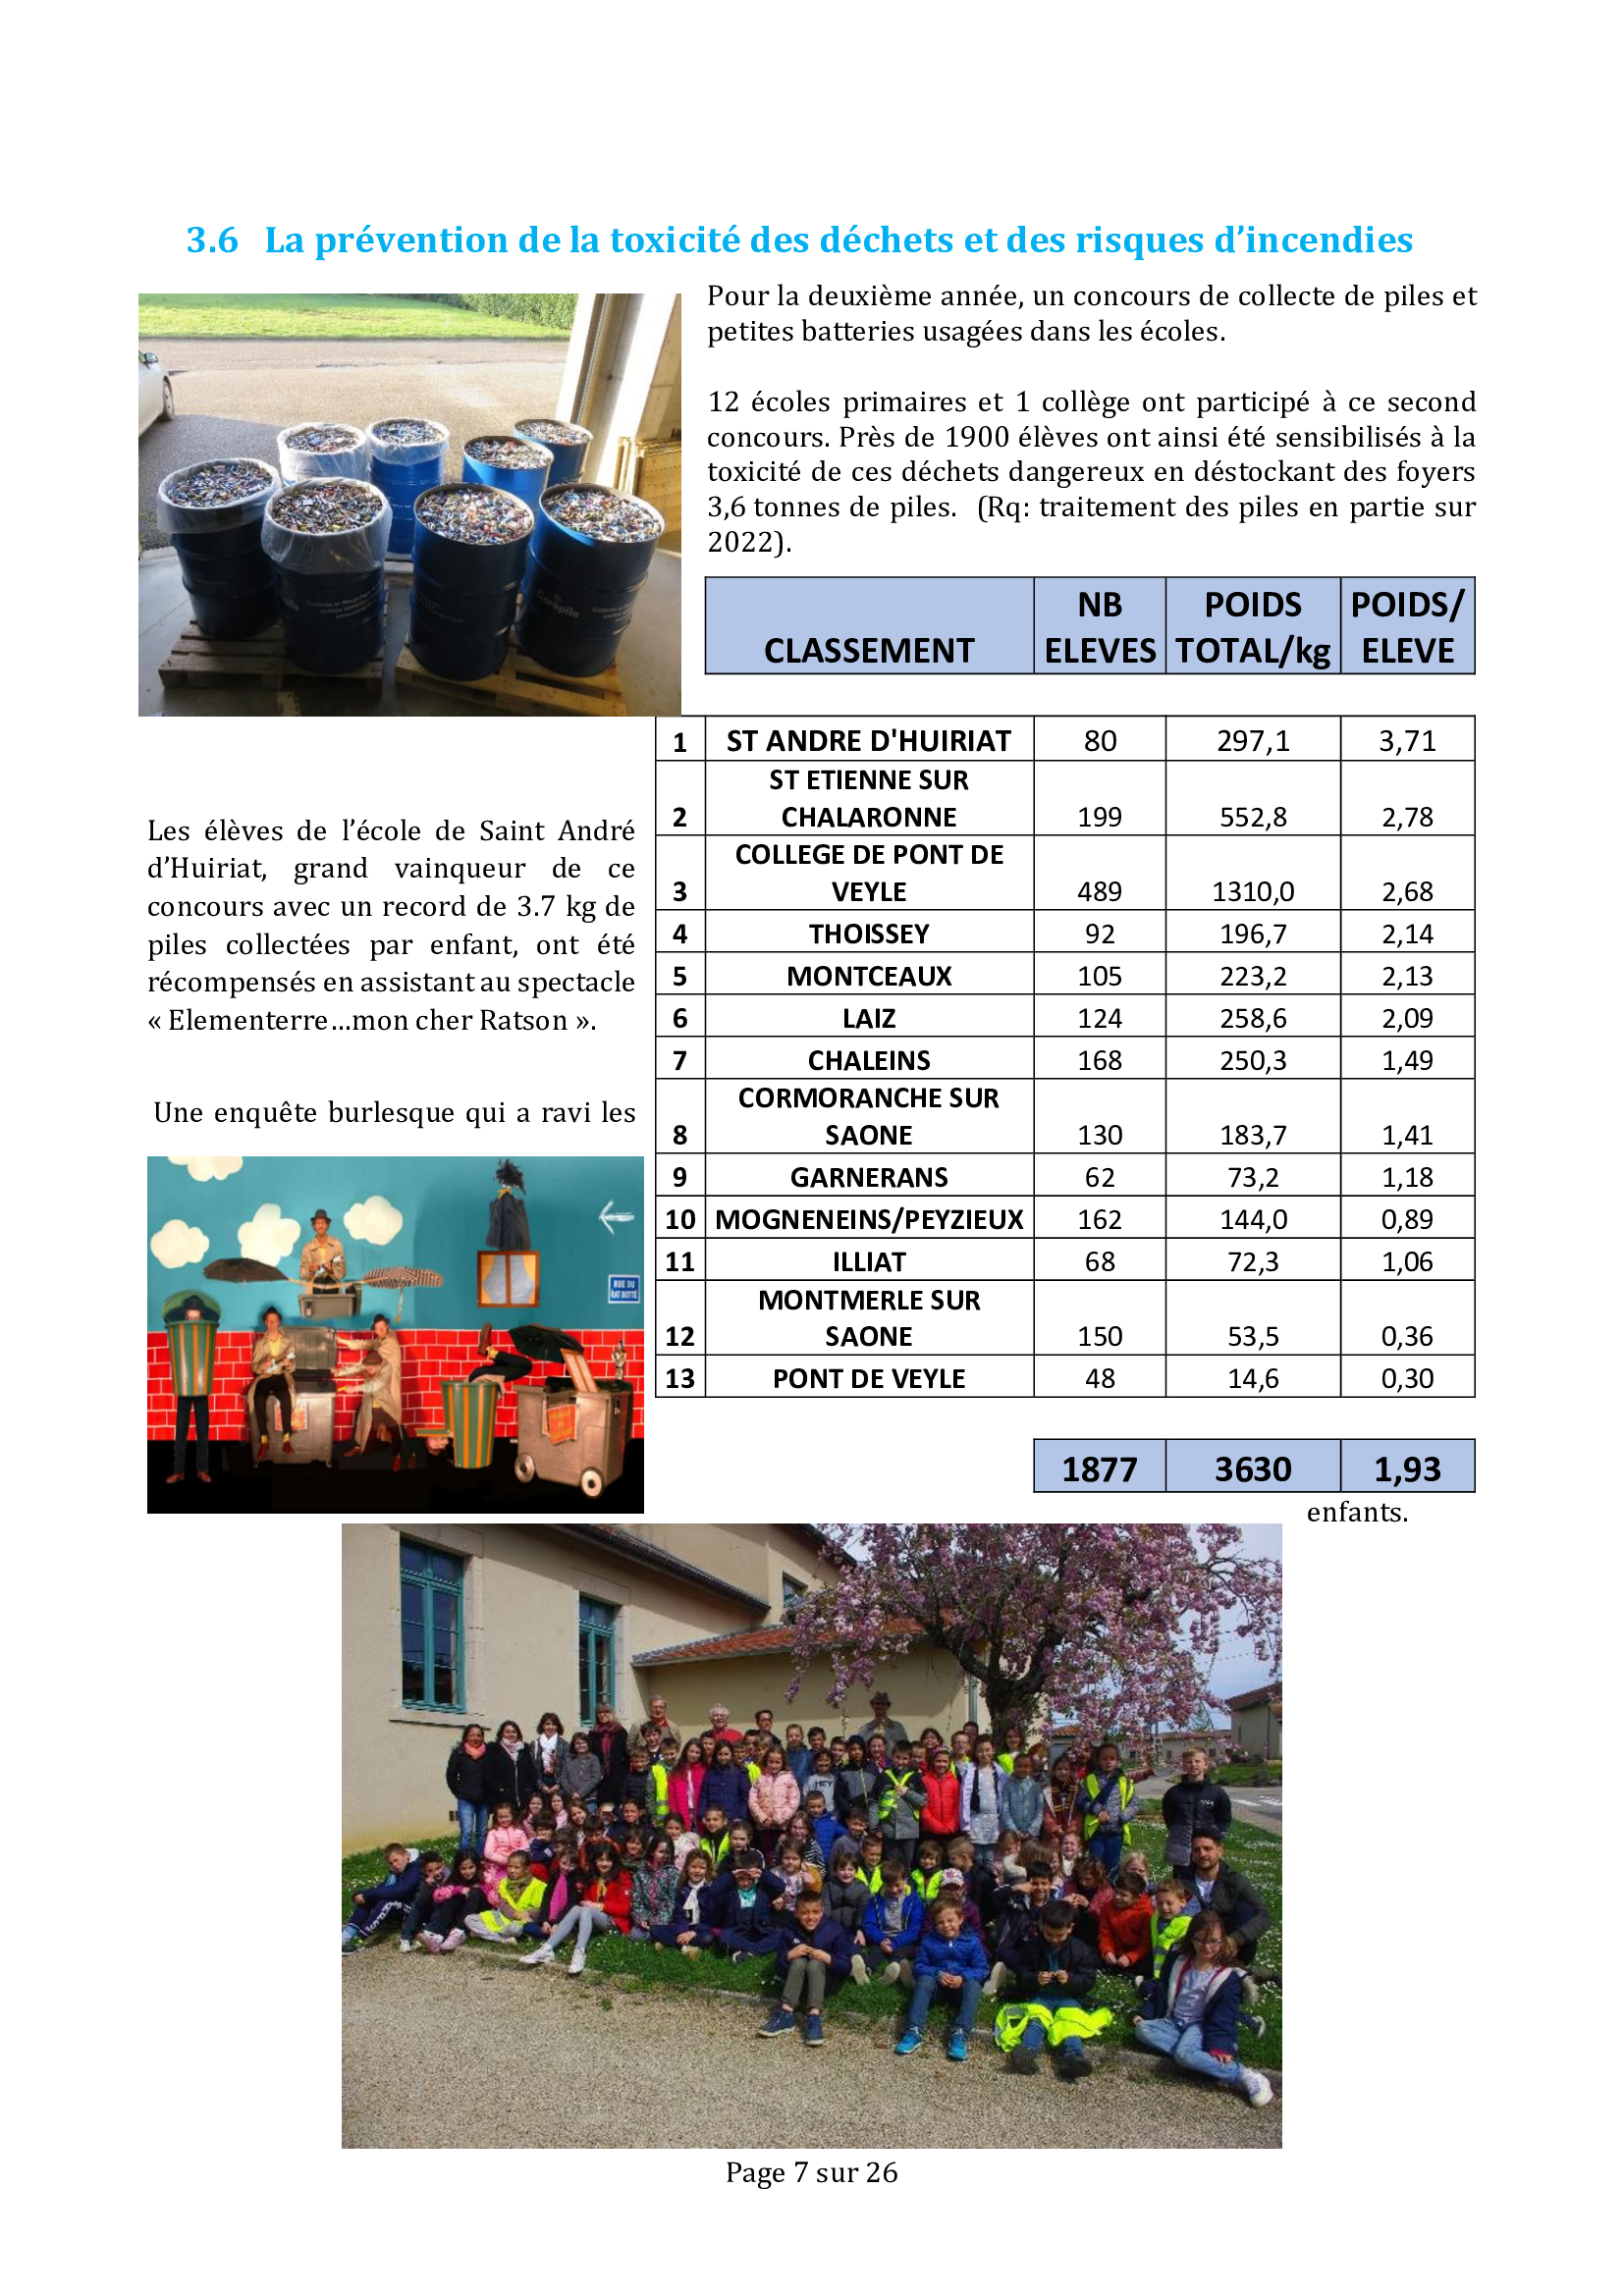 2021 - Rapport annuel - page 7.jpg